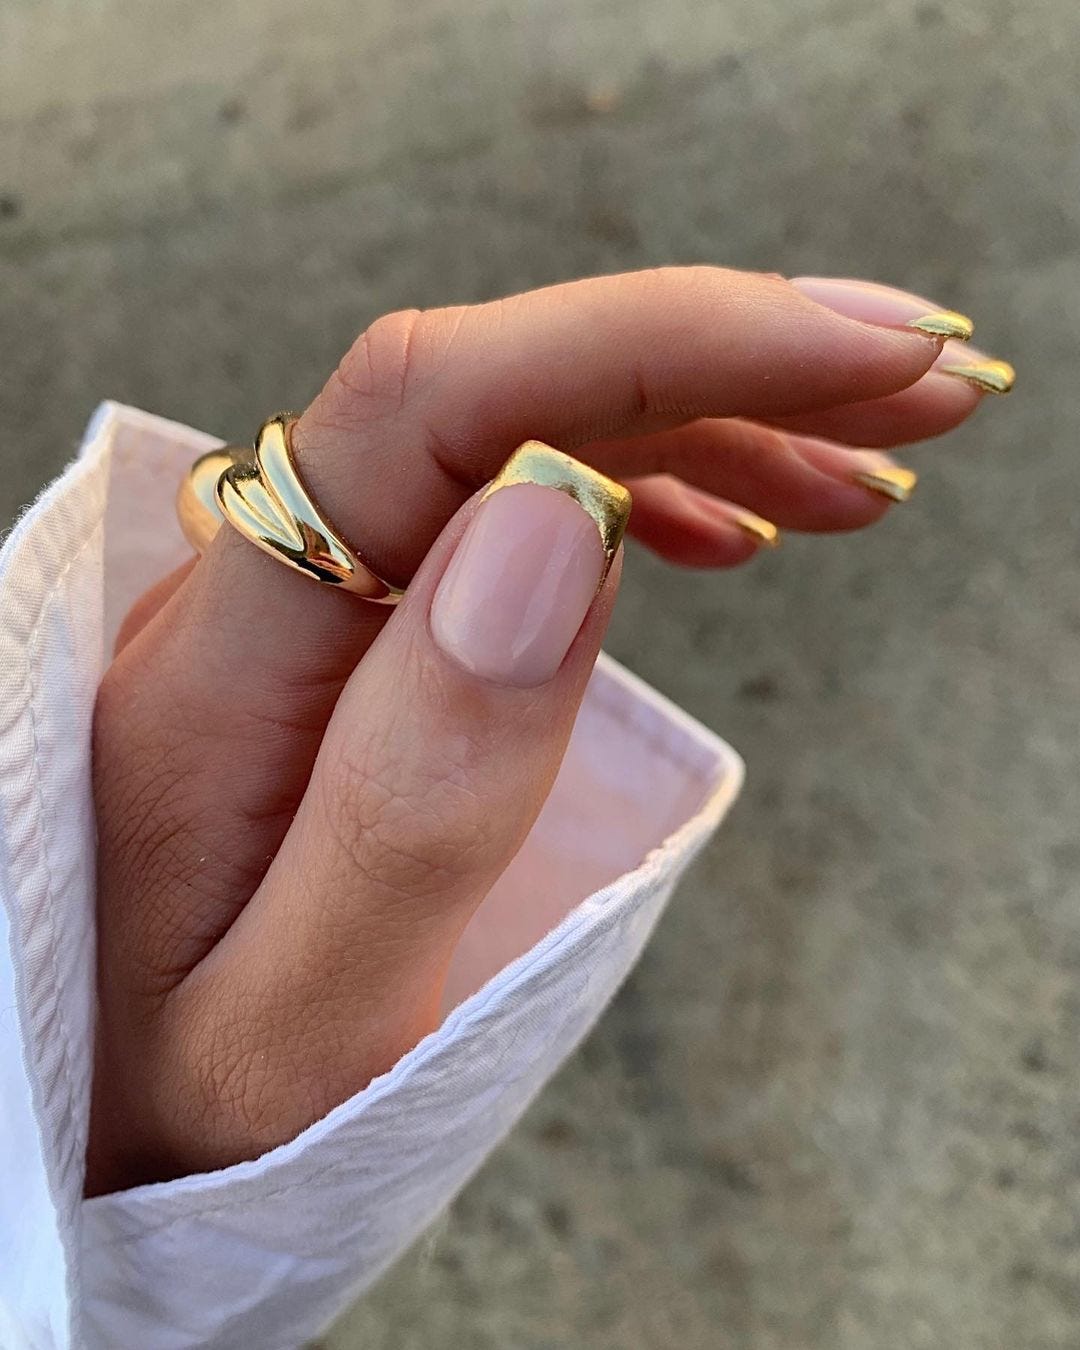 Black and Gold Nails Trend for 2023: The Art of Glamourous Nails, by  Nailkicks